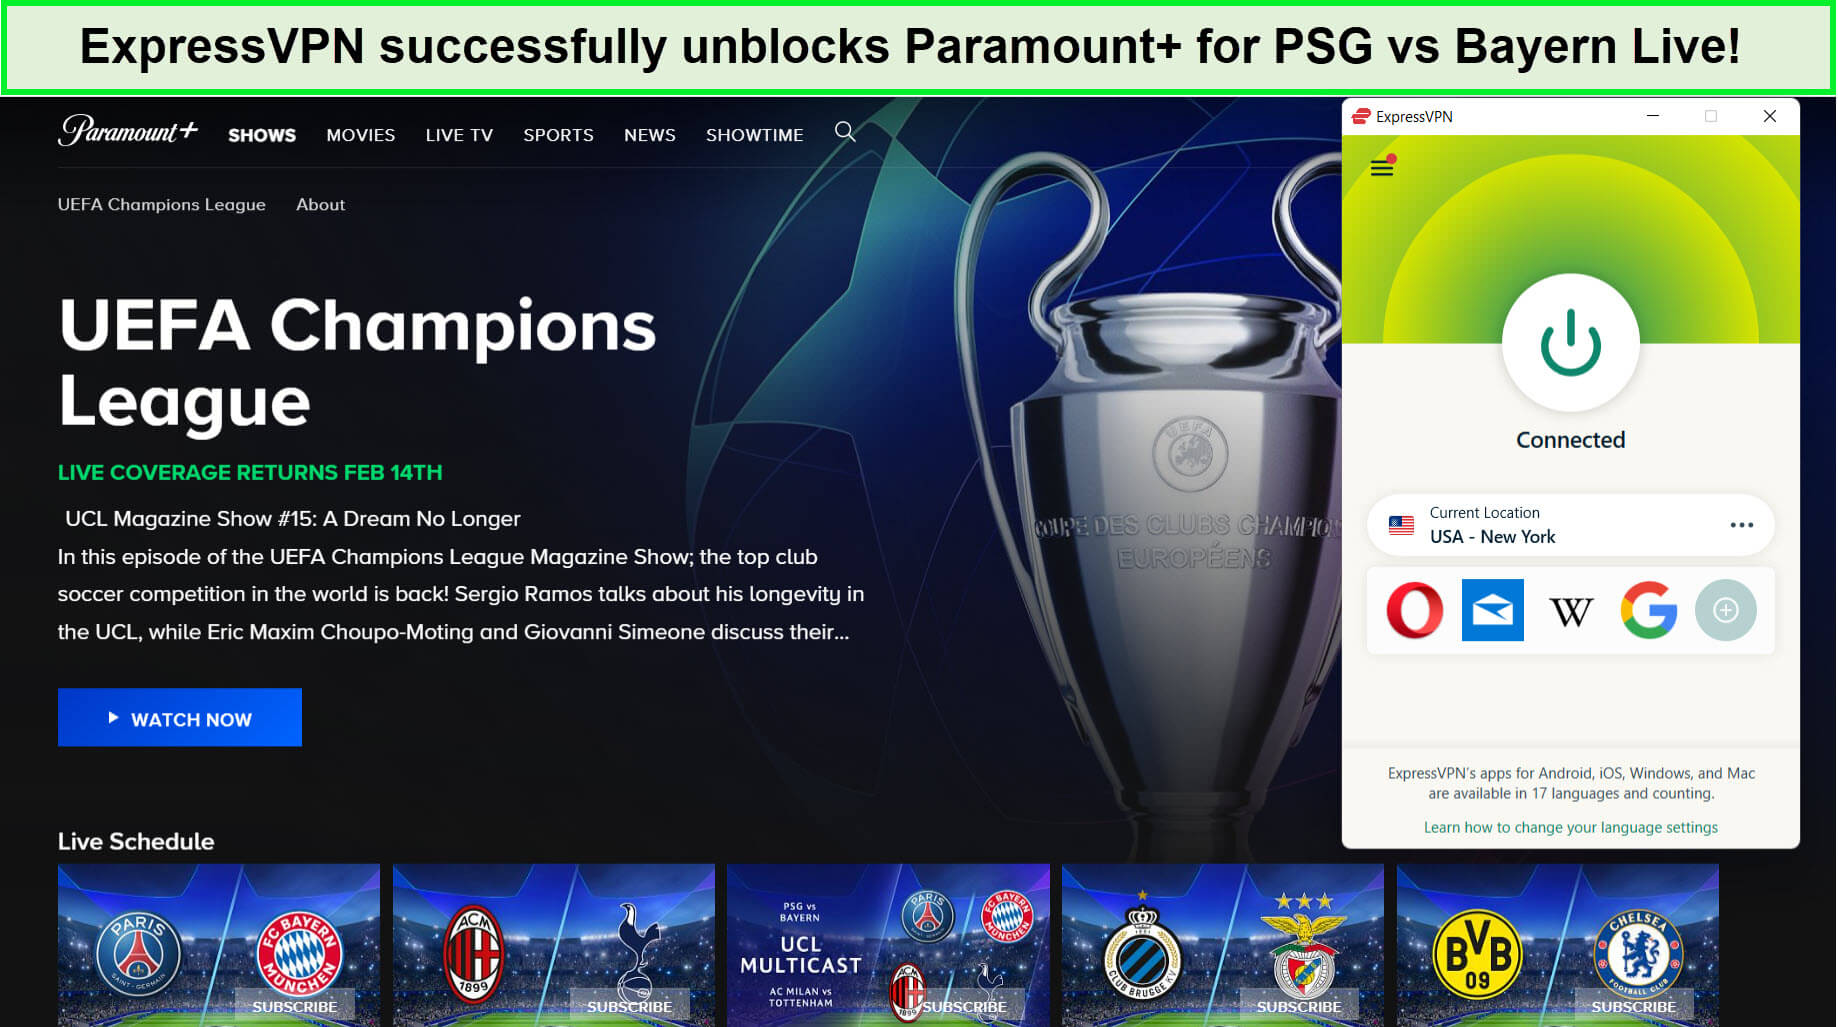 paramount-plus-unblocked-with-expressvpn-for-psg-vs-bayern-live-in-new-zealand